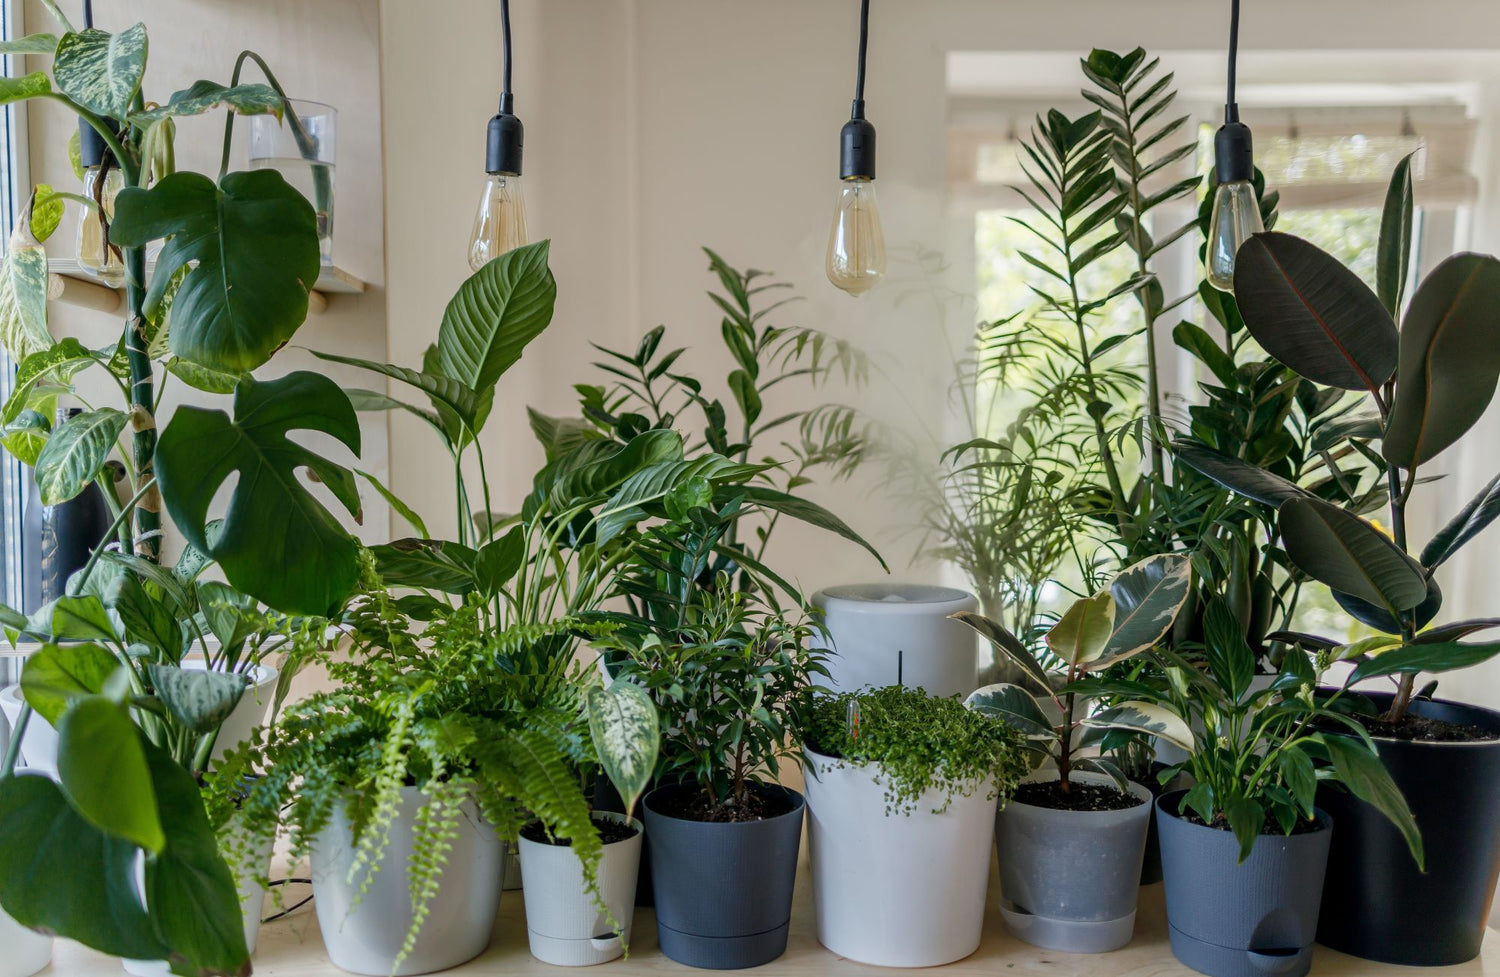 Welcome home! Your Guide to Getting New Houseplants Settled In